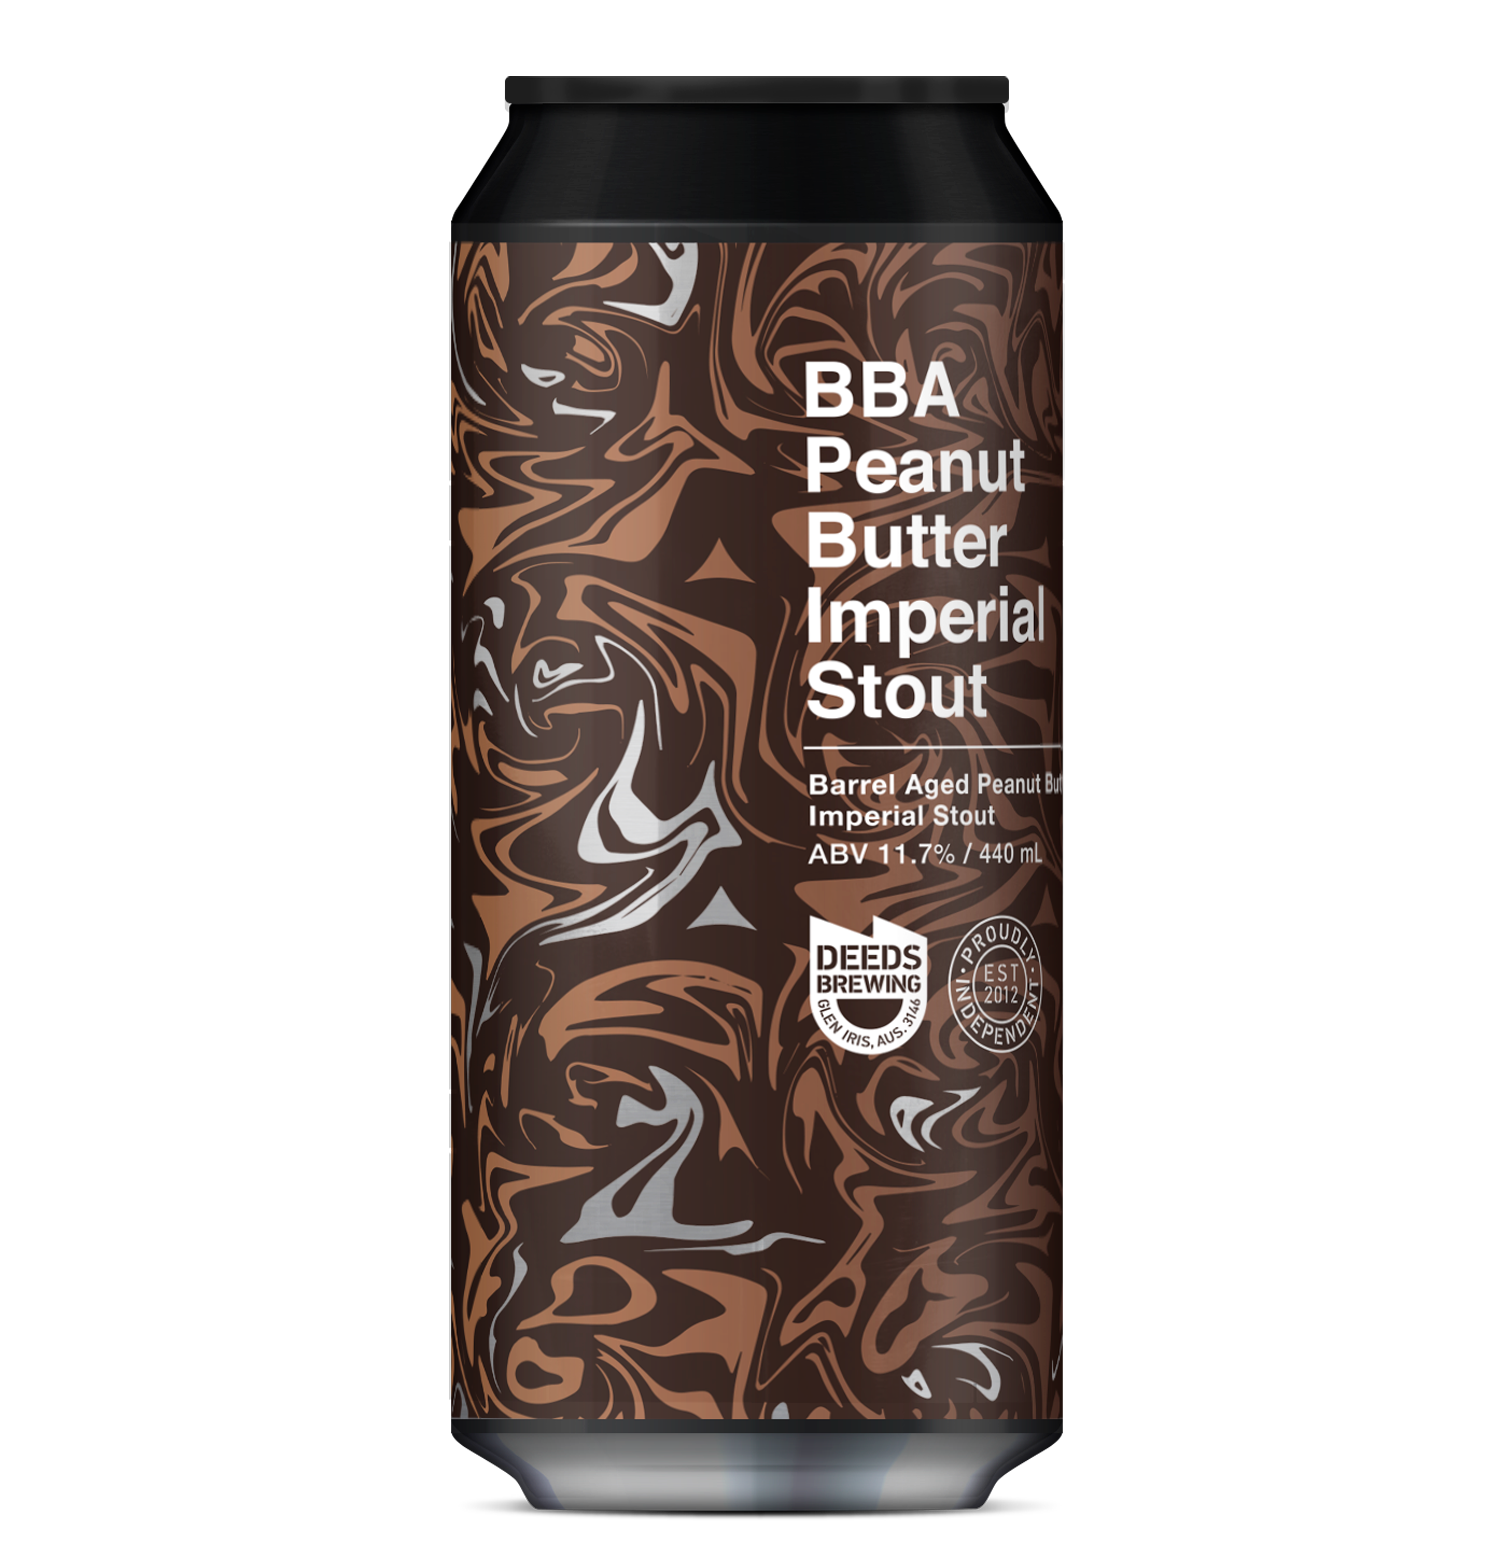 BBA Peanut Butter Imperial Stout